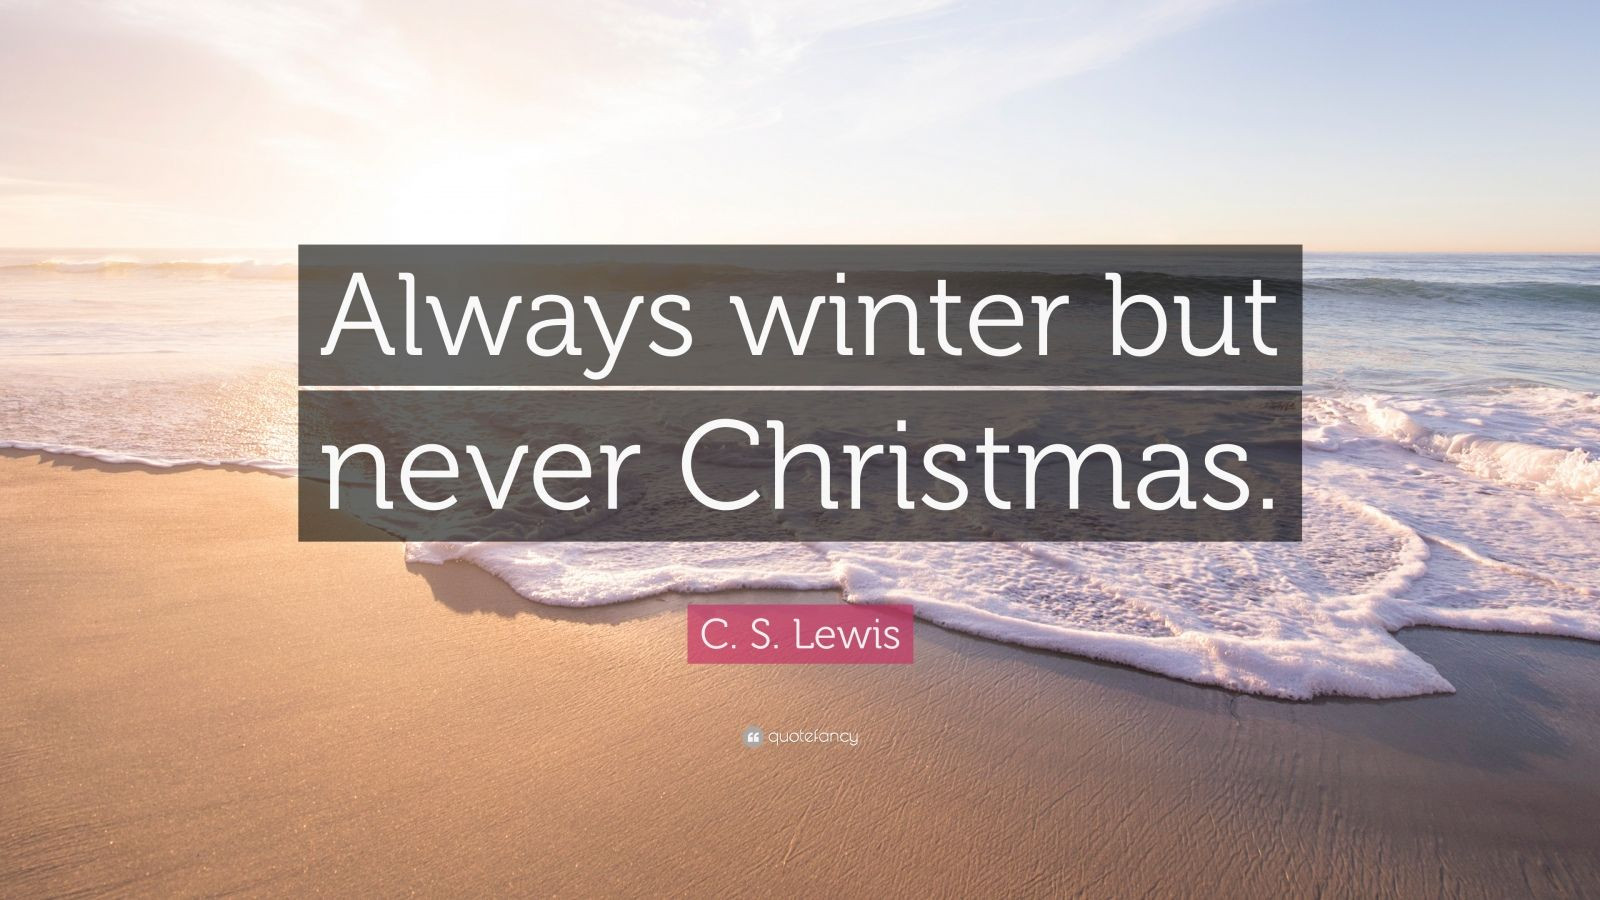 C.S Lewis Christmas Quotes
 C S Lewis Quote “Always winter but never Christmas